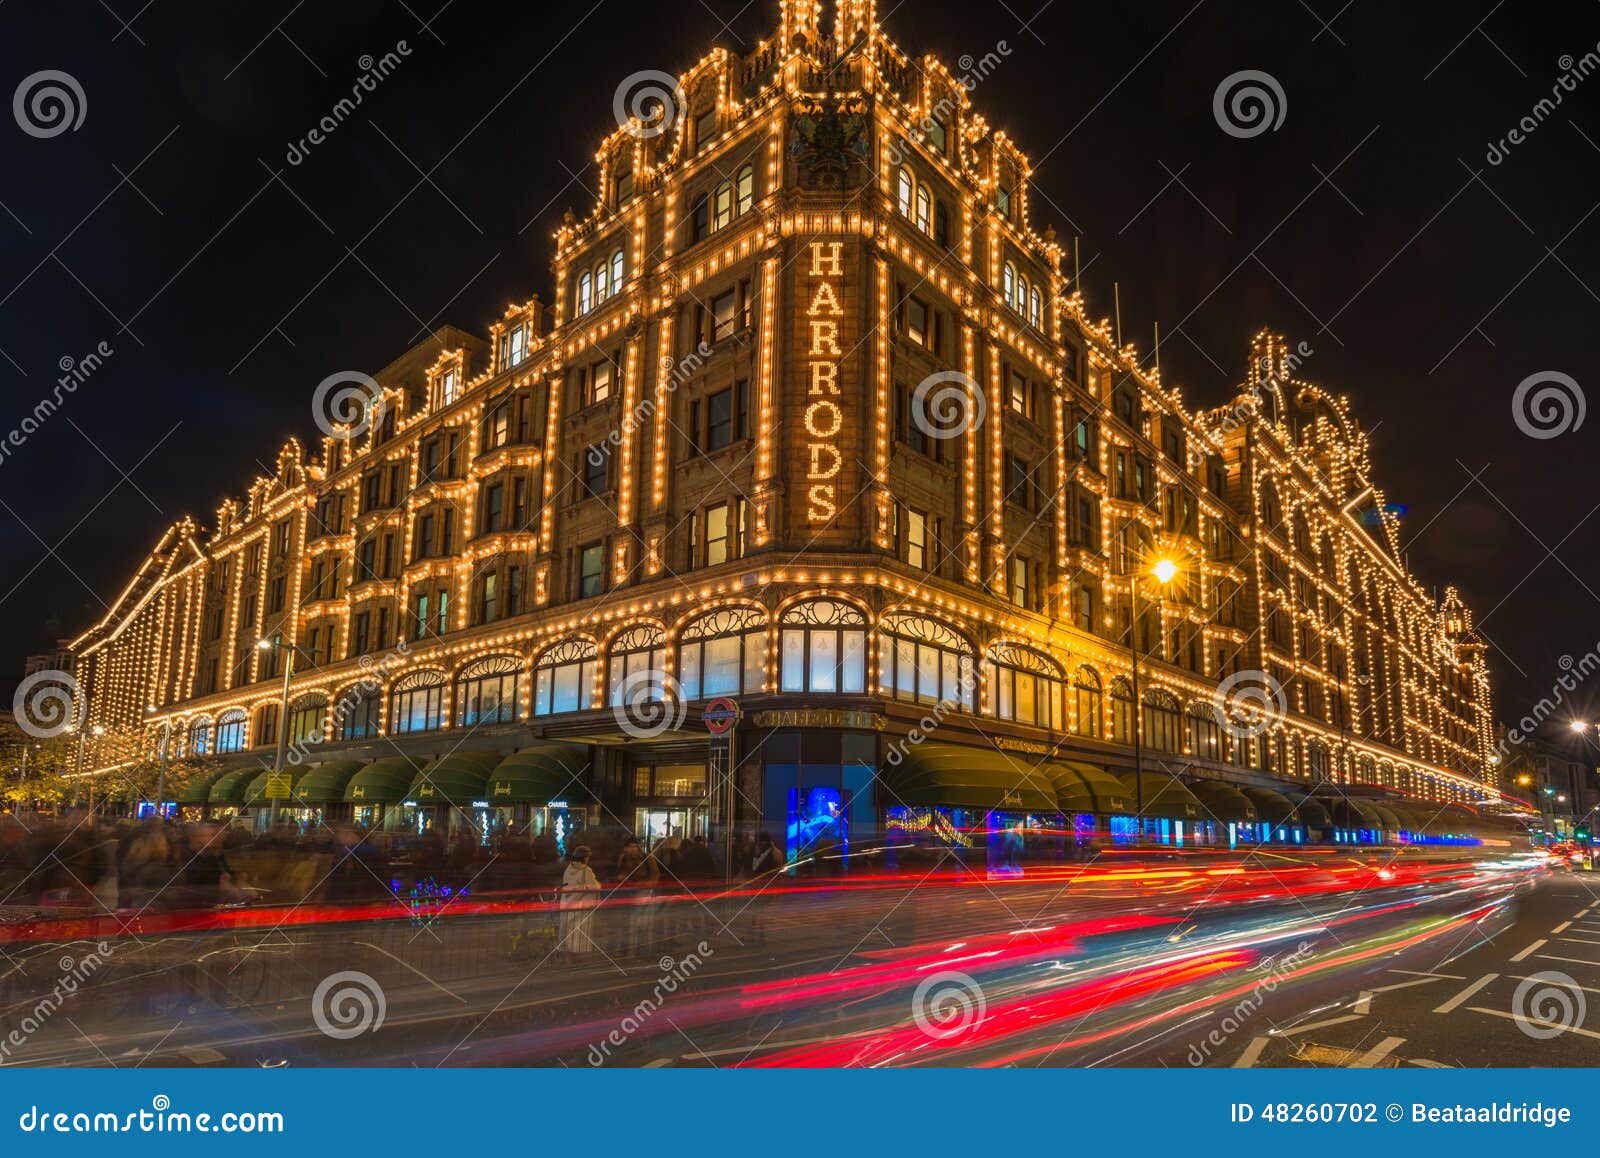  Harrods  Store In London UK With Christmas  Decorations  